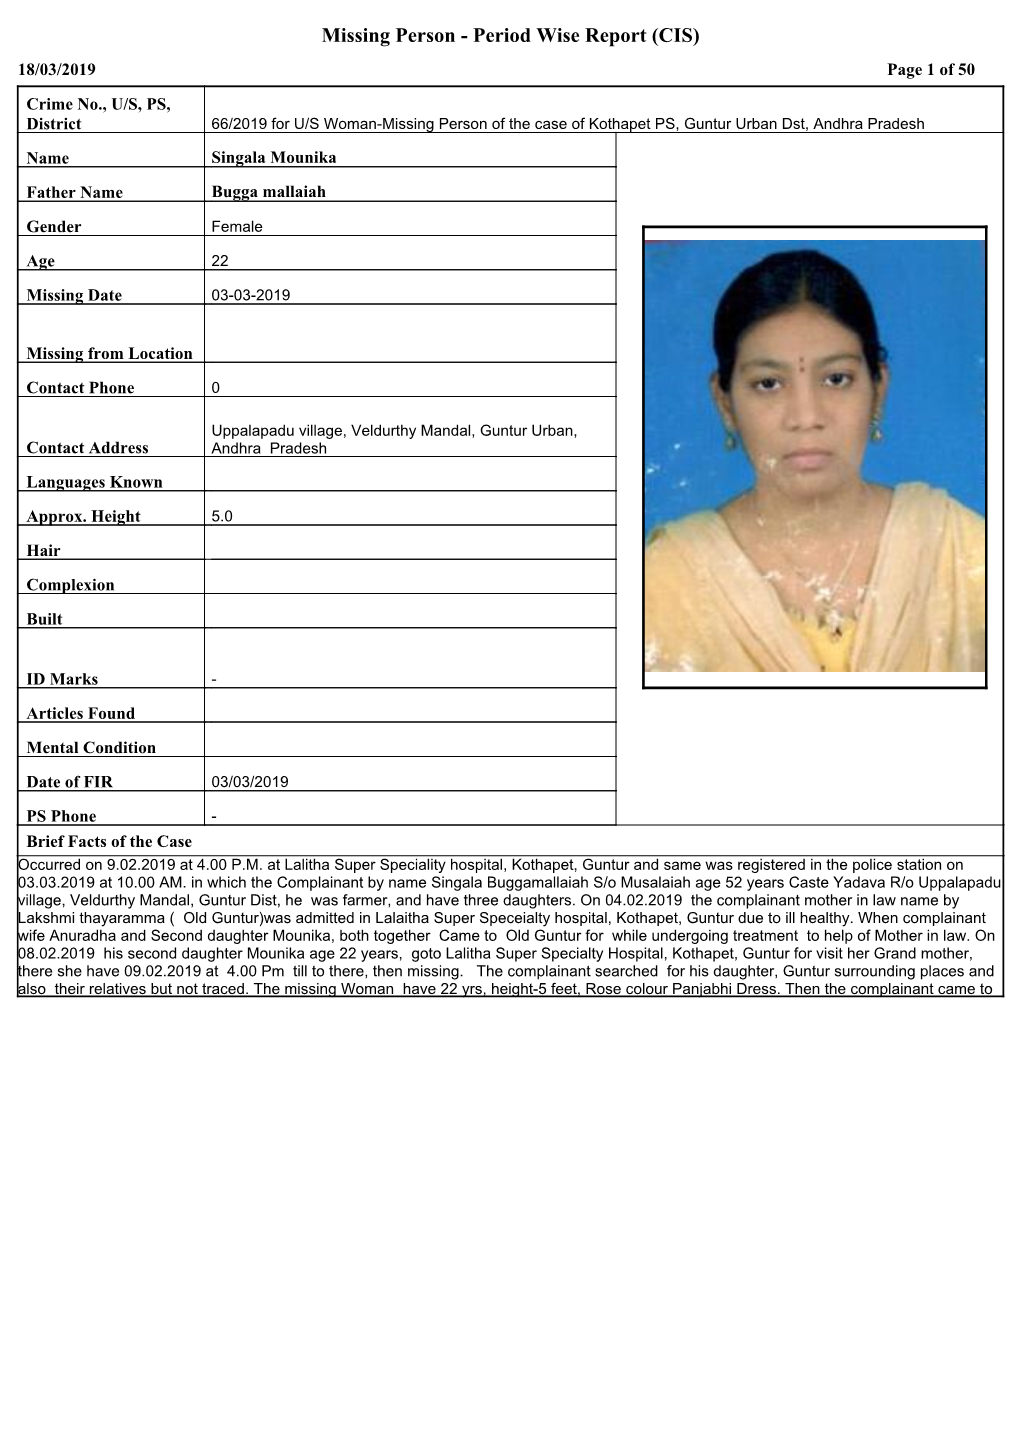 Missing Person - Period Wise Report (CIS) 18/03/2019 Page 1 of 50